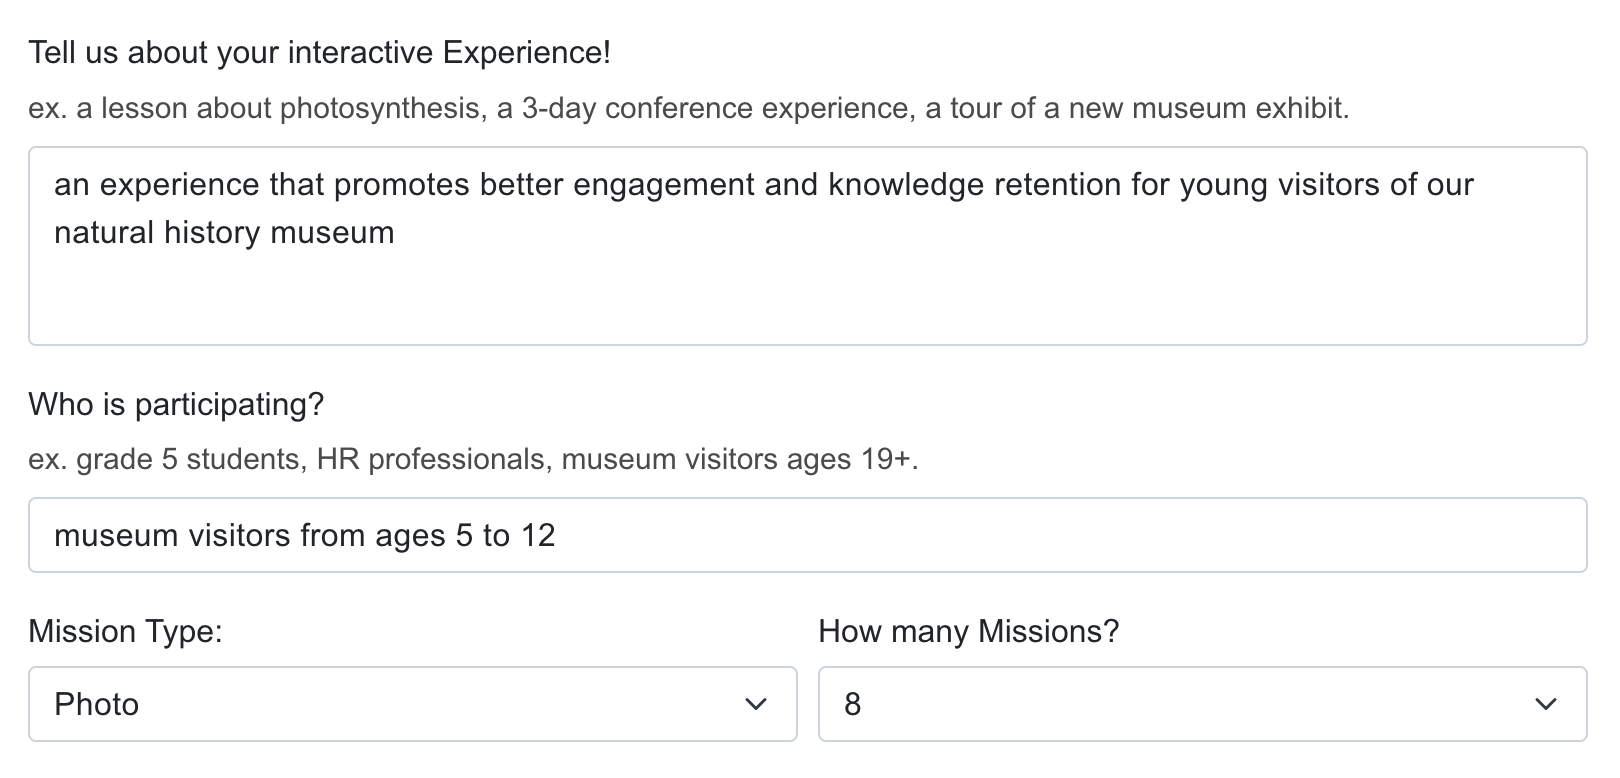 Tell us about your interactive Experience? an experience that promotes better engagement and knowledge retention for young visitors of our natural history museum. Who is participating? museum visitors from ages 5 to 12.